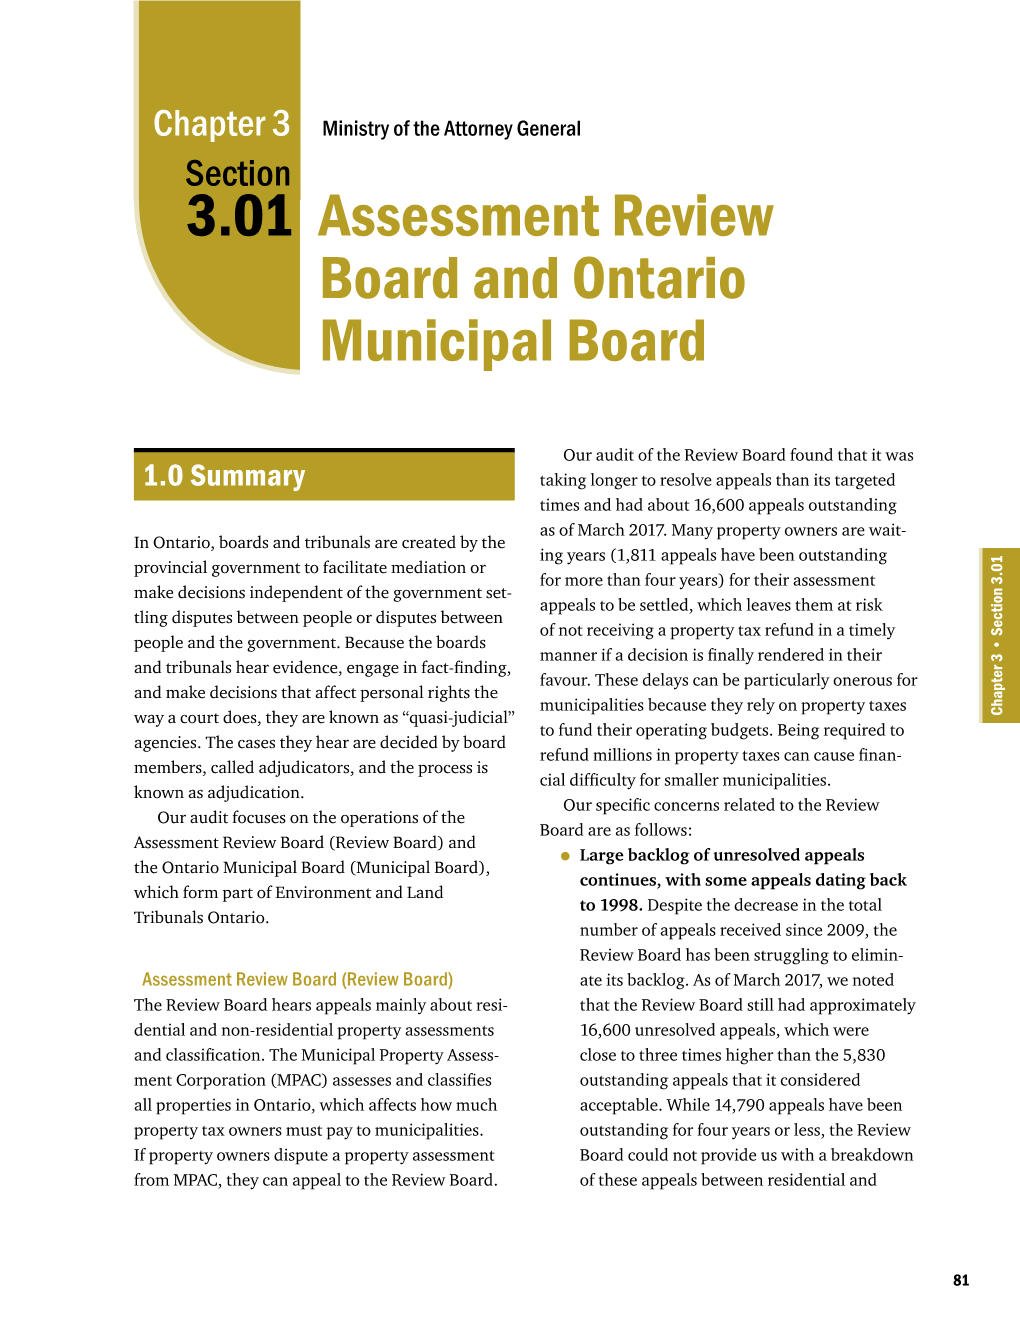 3.01 Assessment Review Board and Ontario Municipal Board